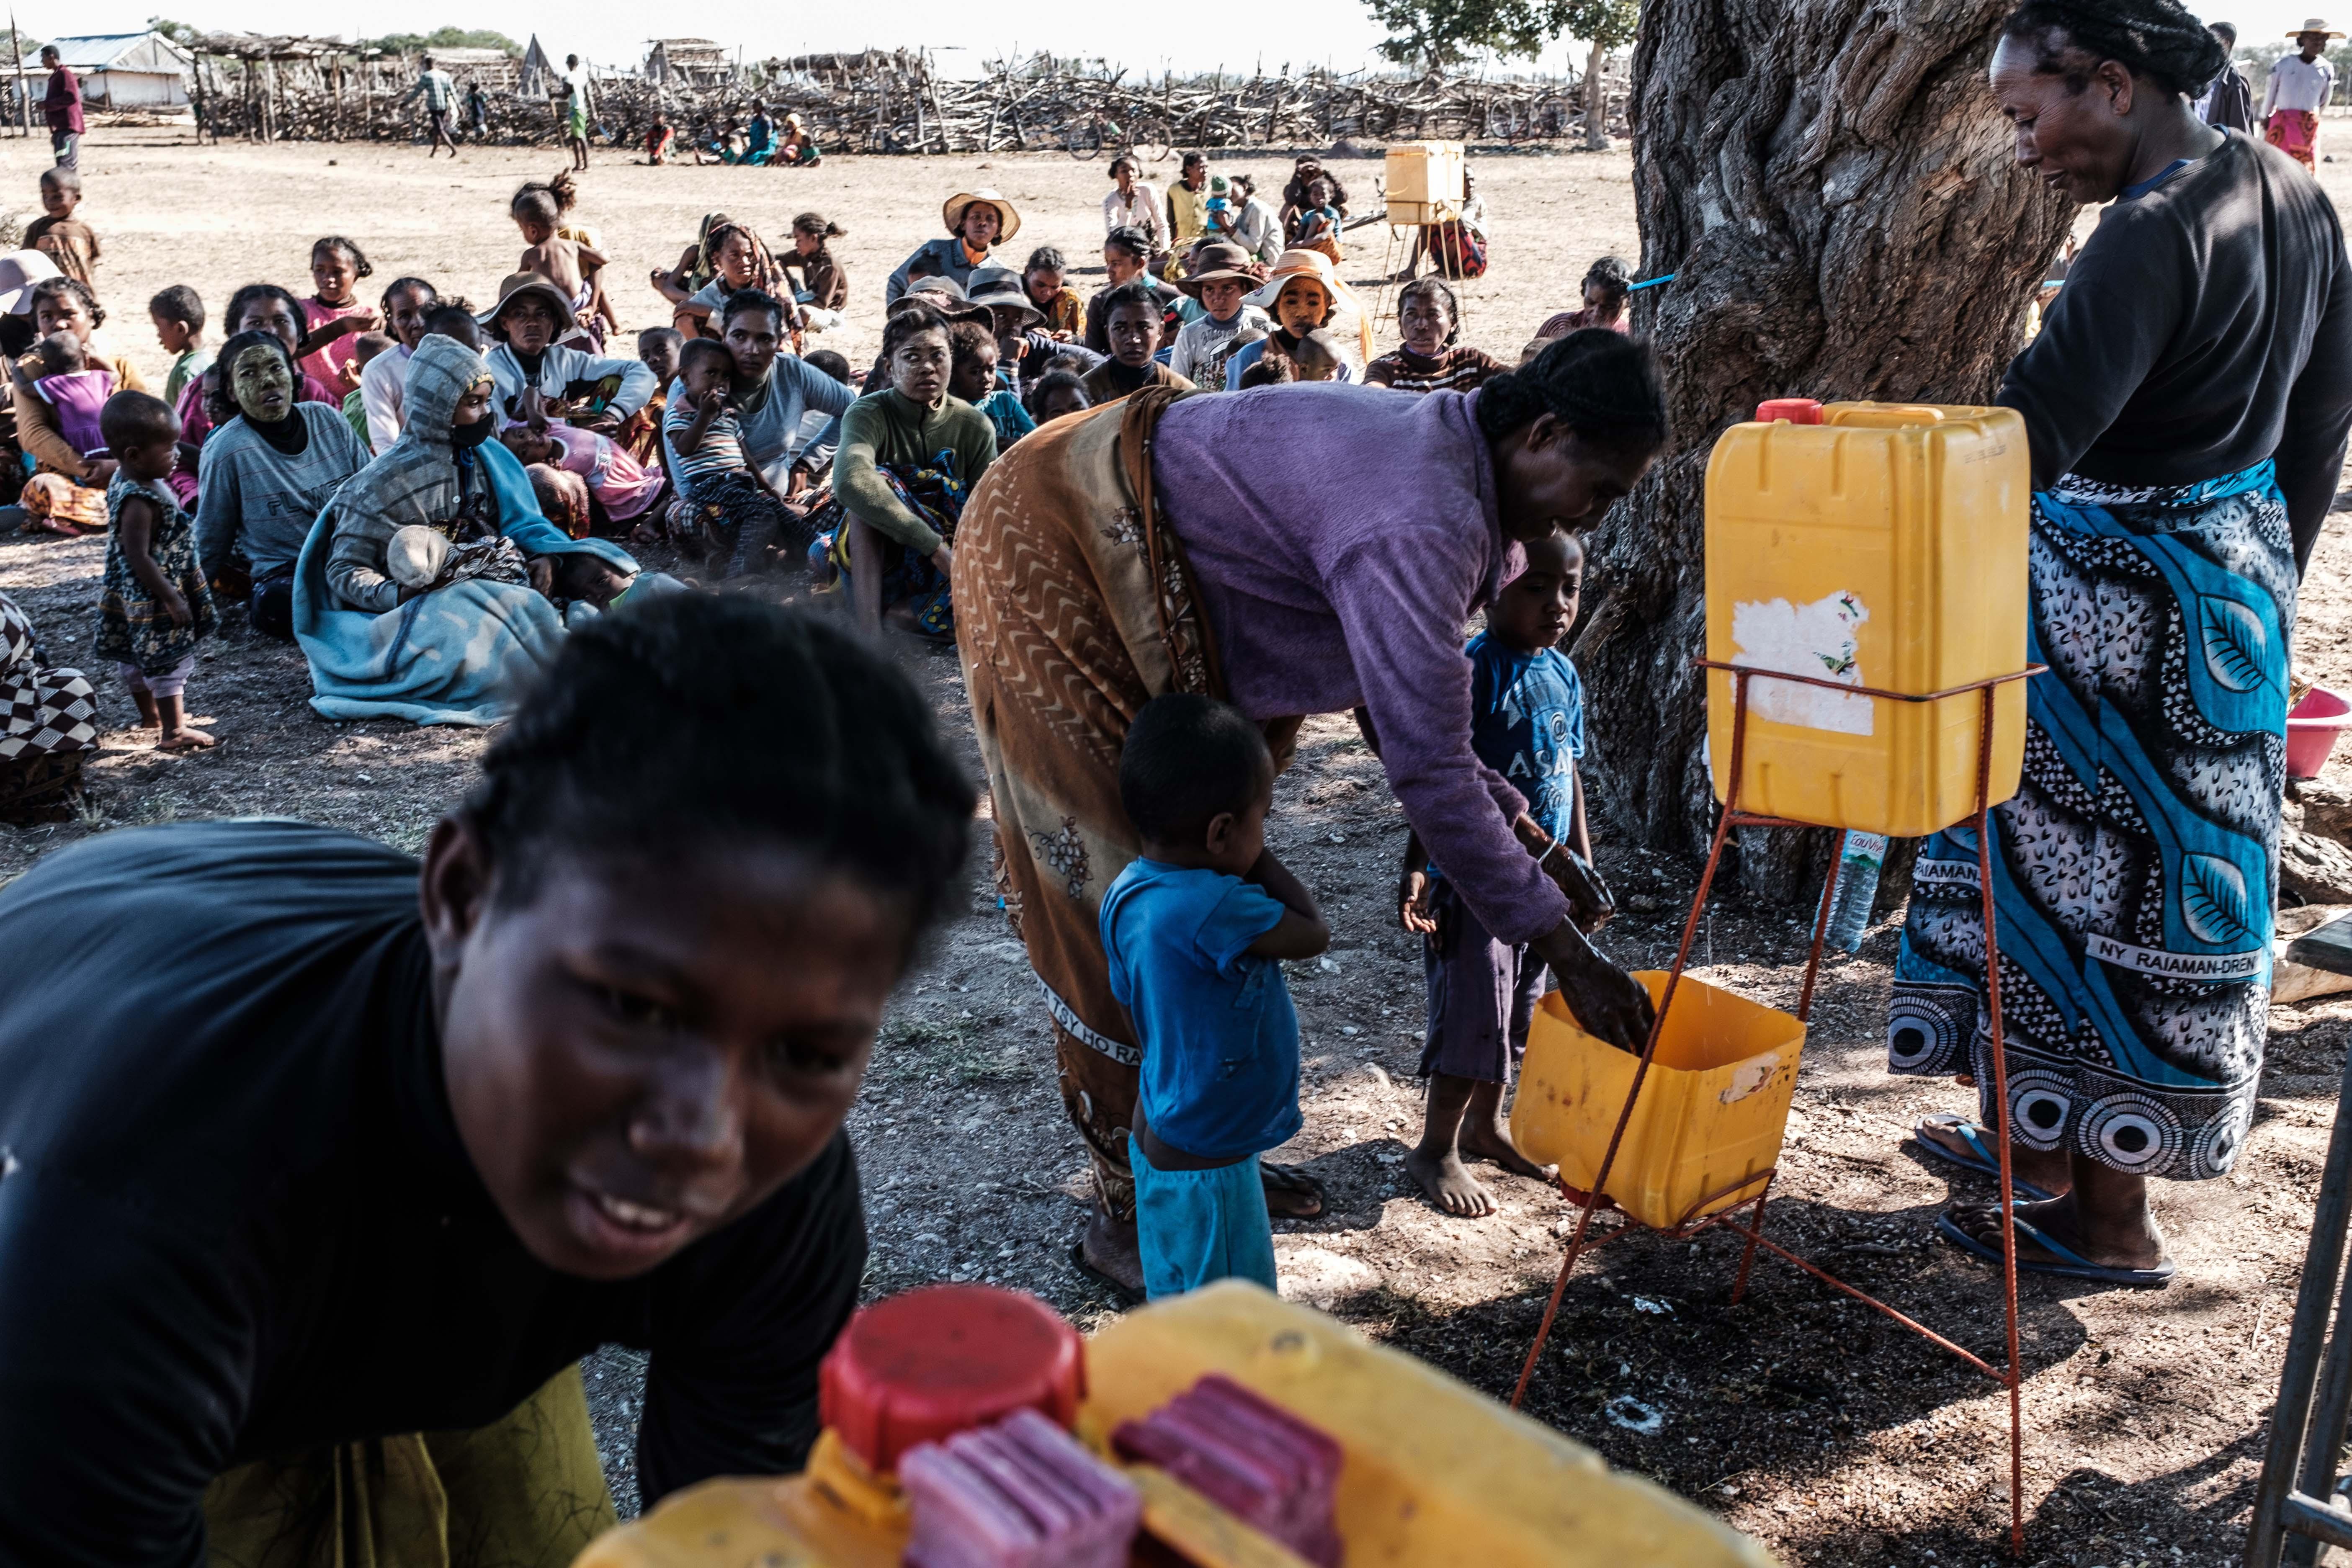 Exploratory mission led by MSF to respond to the on-going nutritional crisis in Madagascar.